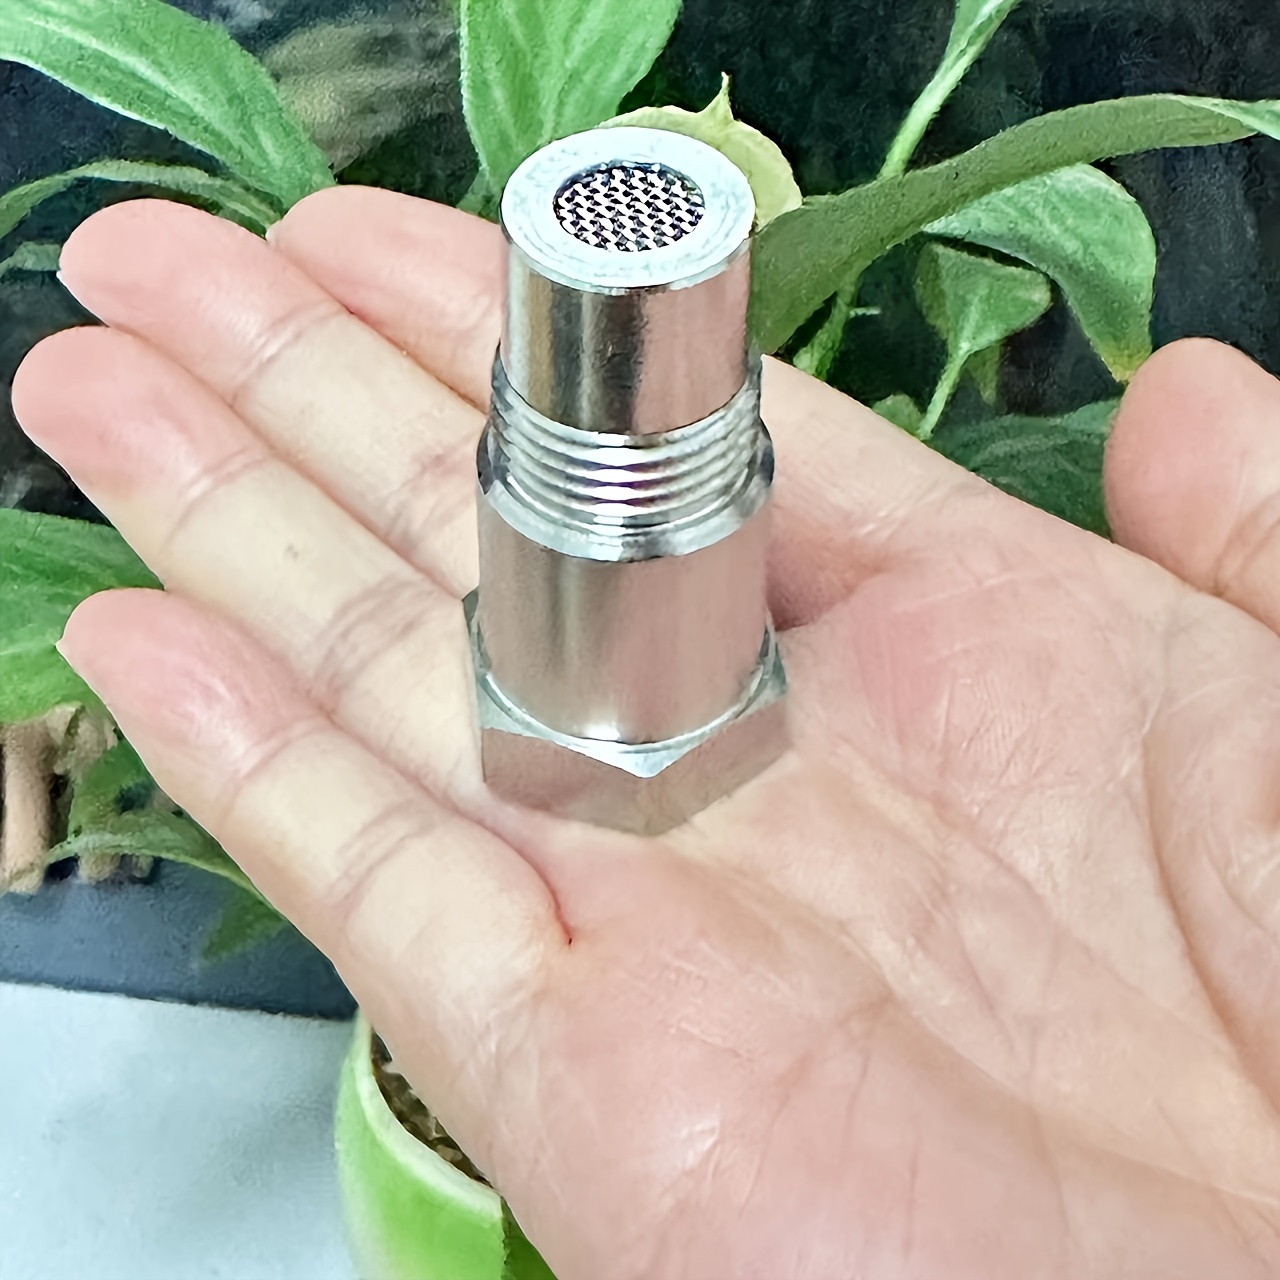 

easy-to-use" Stainless Steel Mesh Hose Nozzle For Enhanced Water Flow & Filtration - Manual Energy Source